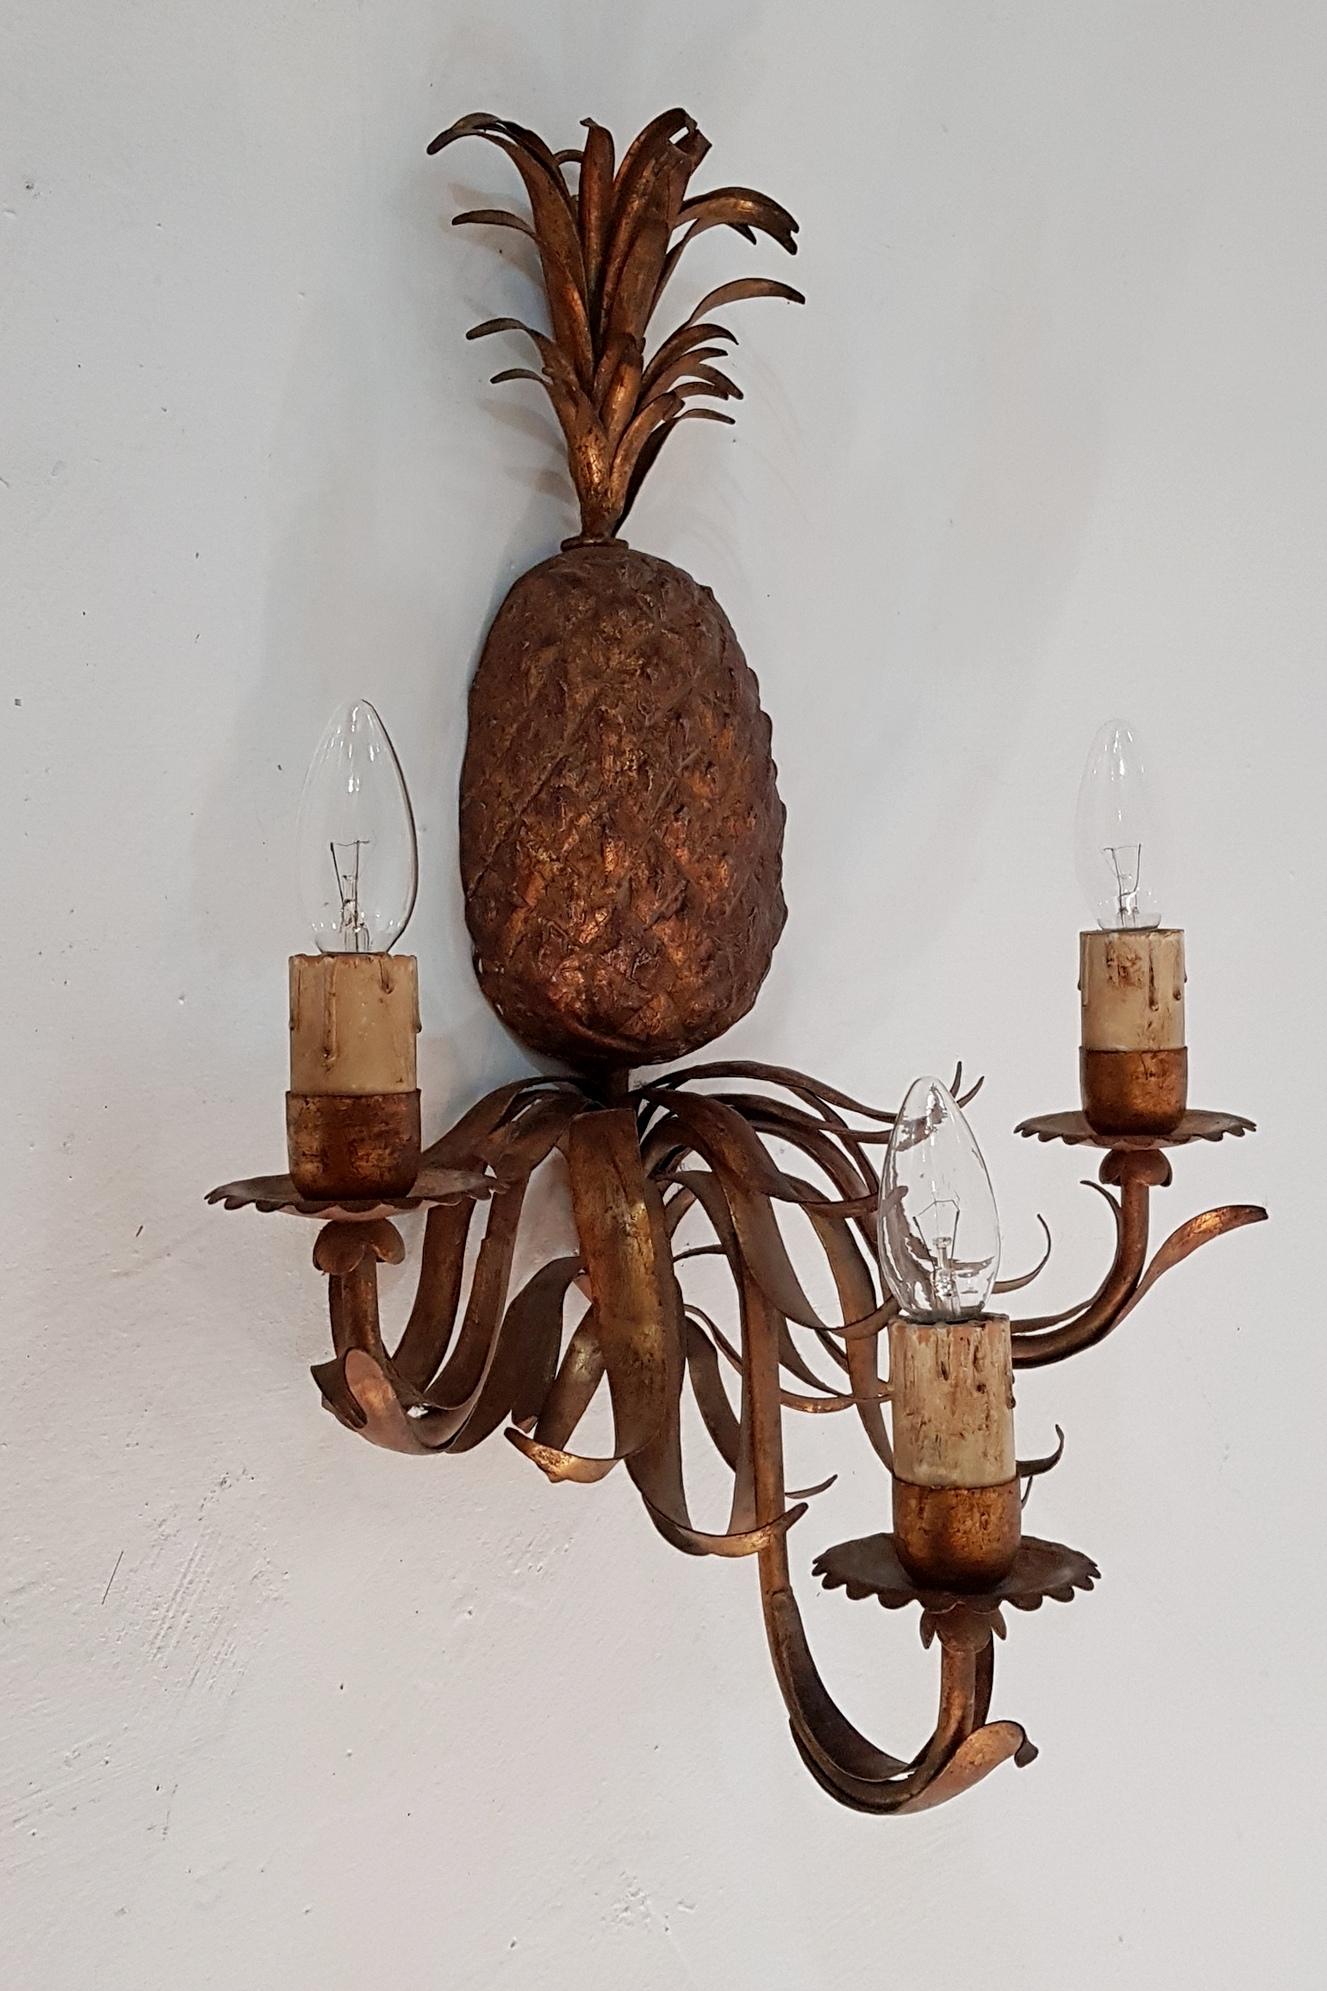 Large single wall sconce in the shape of a pineapple with three arms each holding a faux candle for an E27 lightbulb.